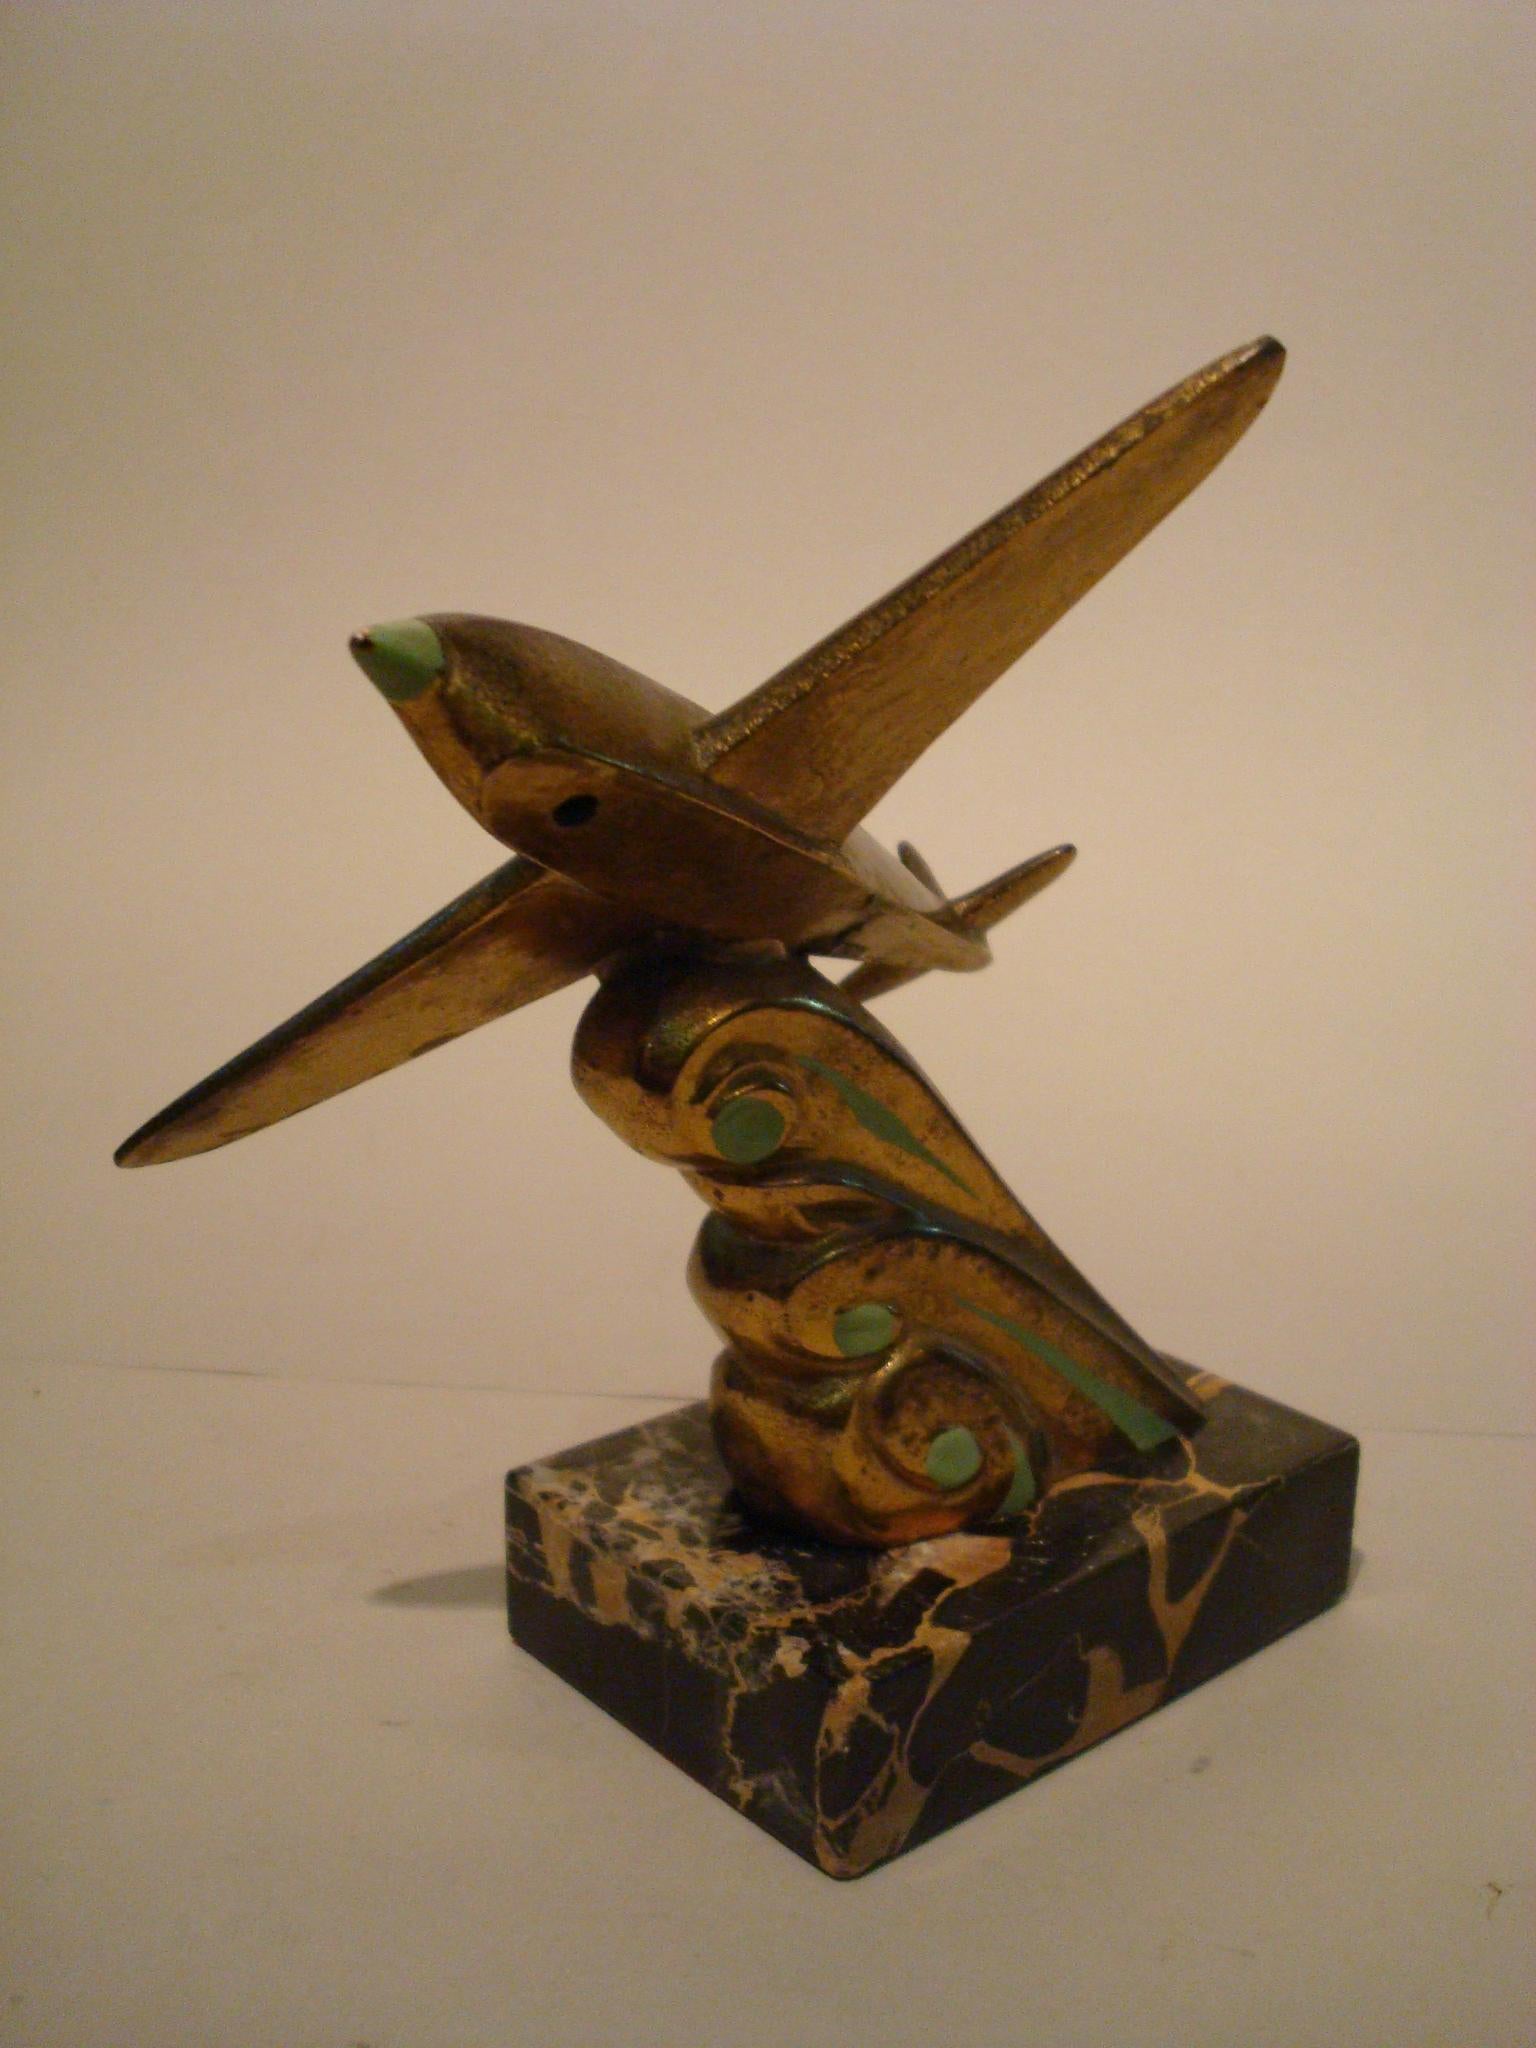 Cast Art Deco French Airplane Desk Paperweight Sculpture